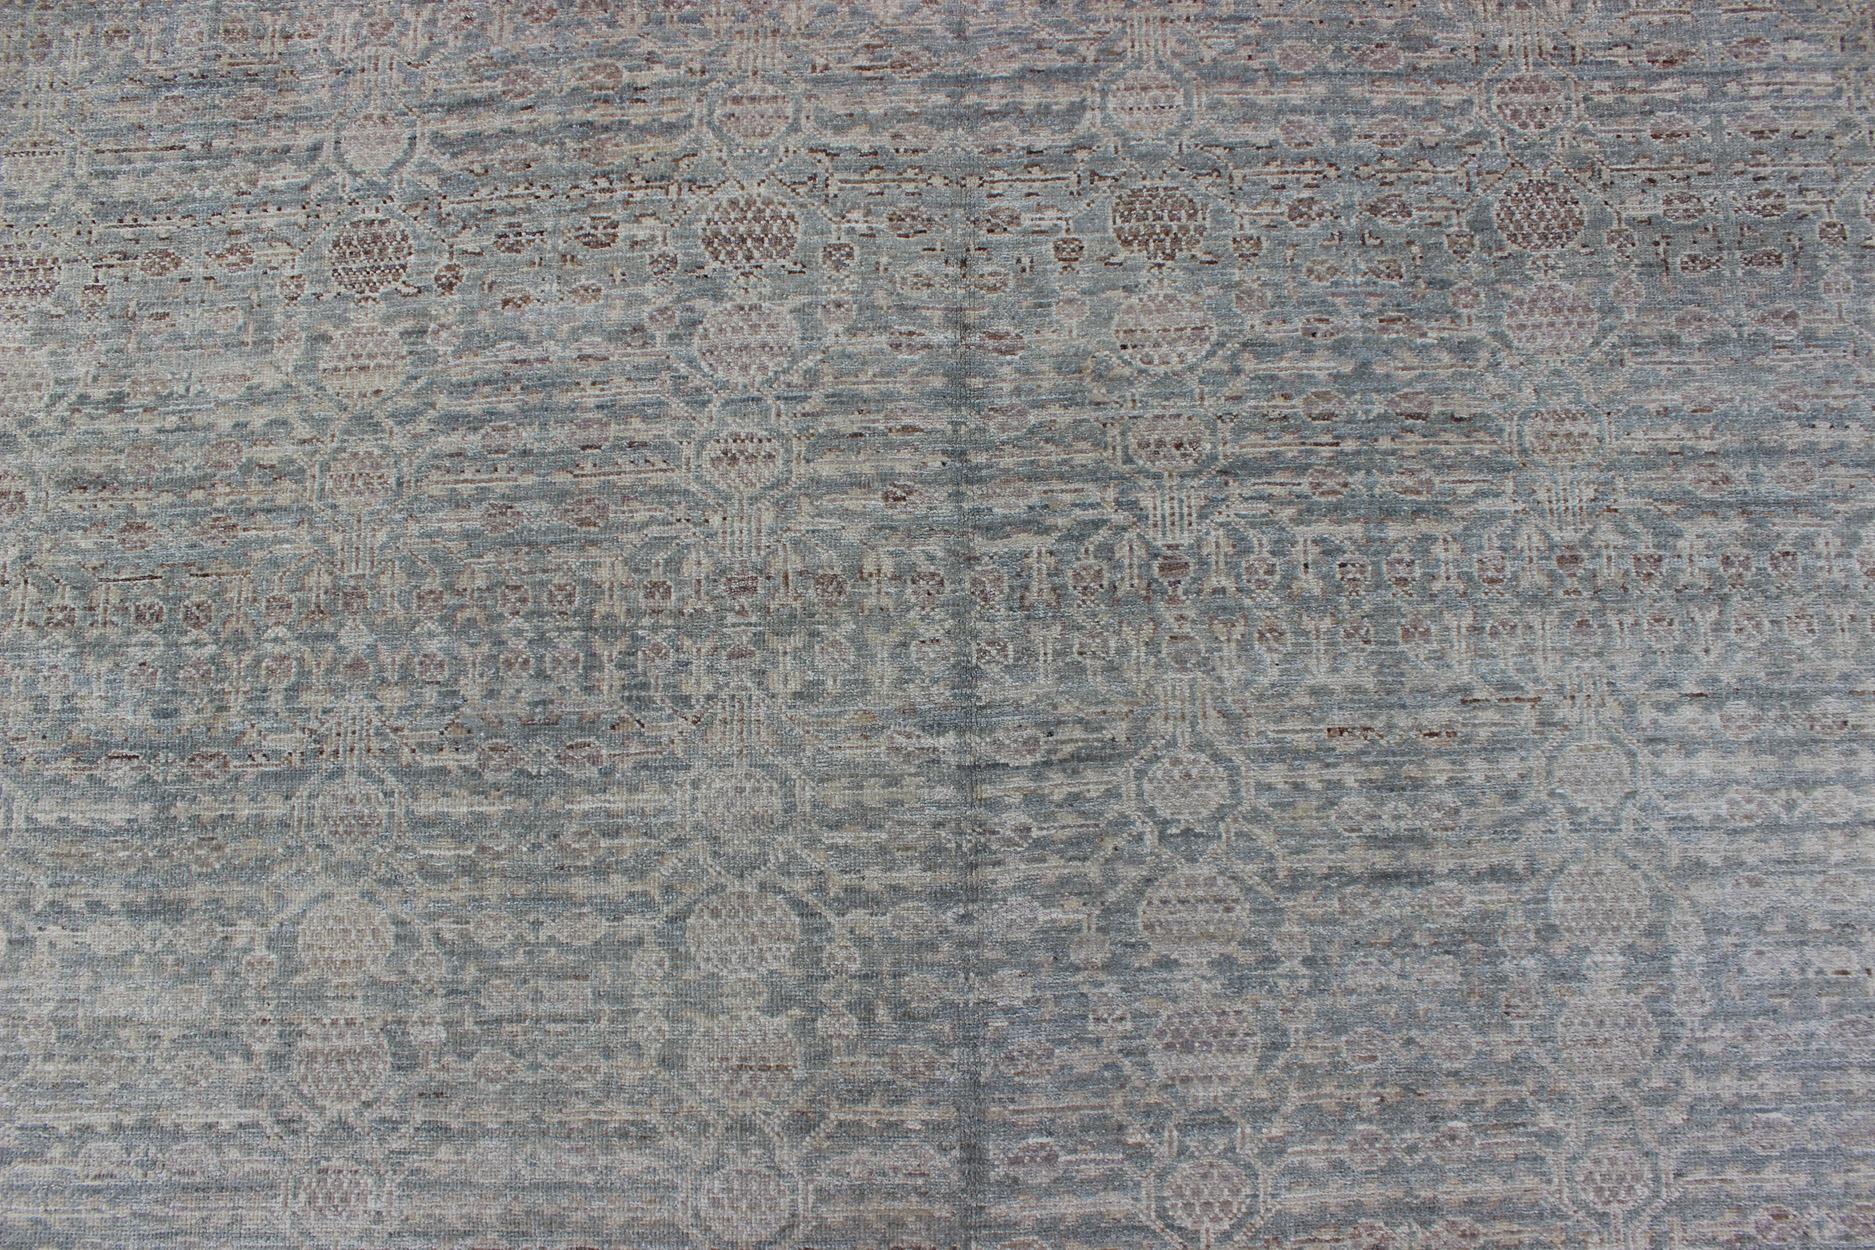 Contemporary Transitional, Finely Woven Khotan Pomegranate Design in Gray/Green, Brown, Taupe For Sale